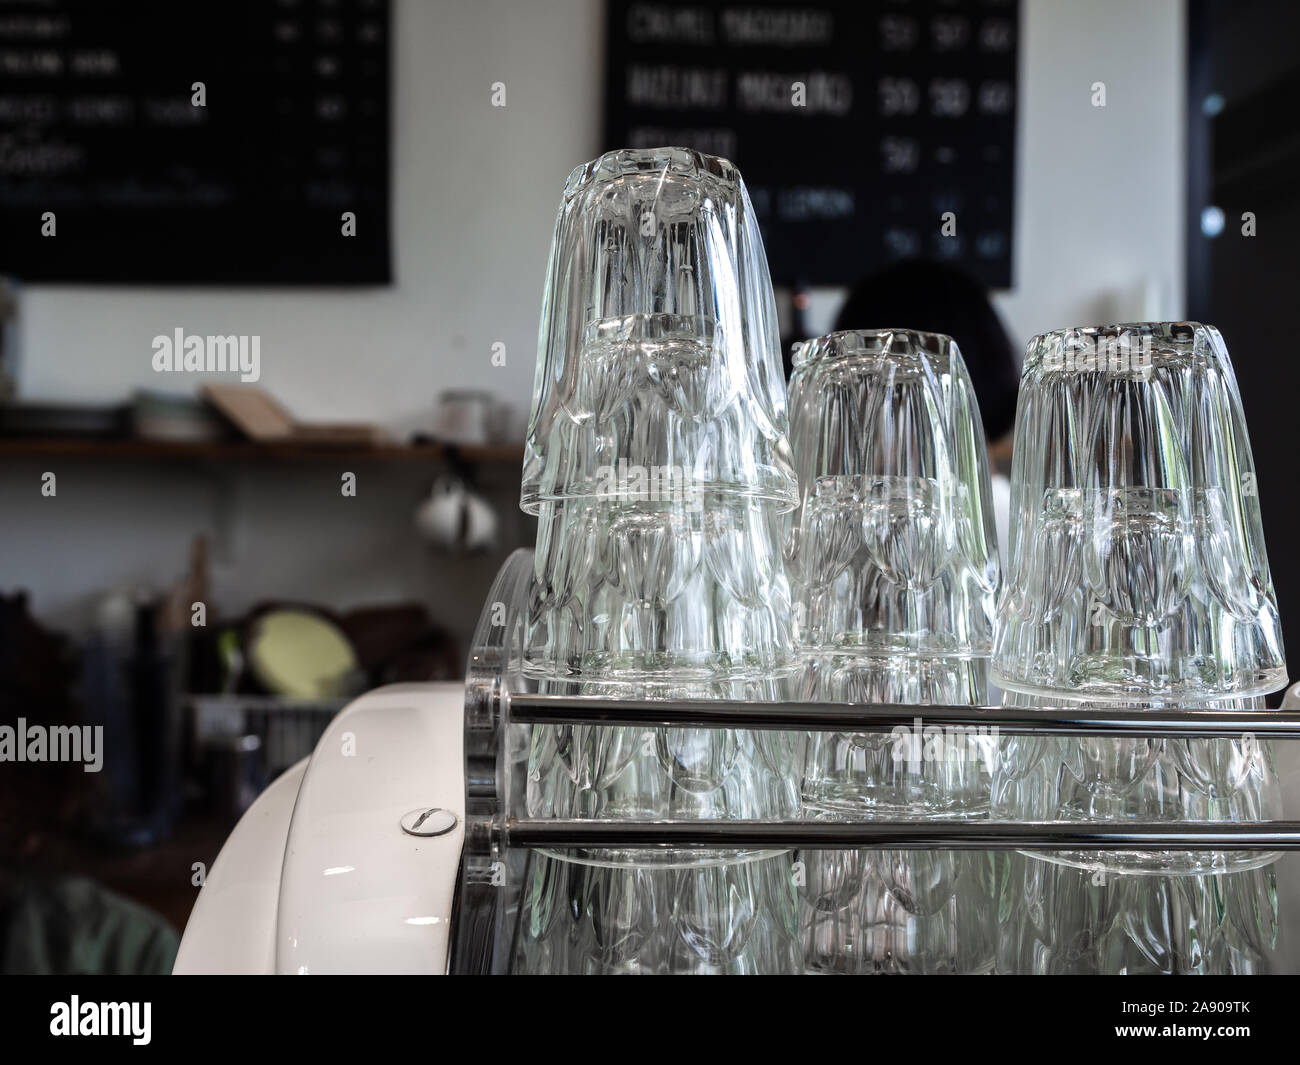 Stacks of clean empty glasses on stainless steel shelf in cafe. Piles of upside down drinking water glasses. Stock Photo